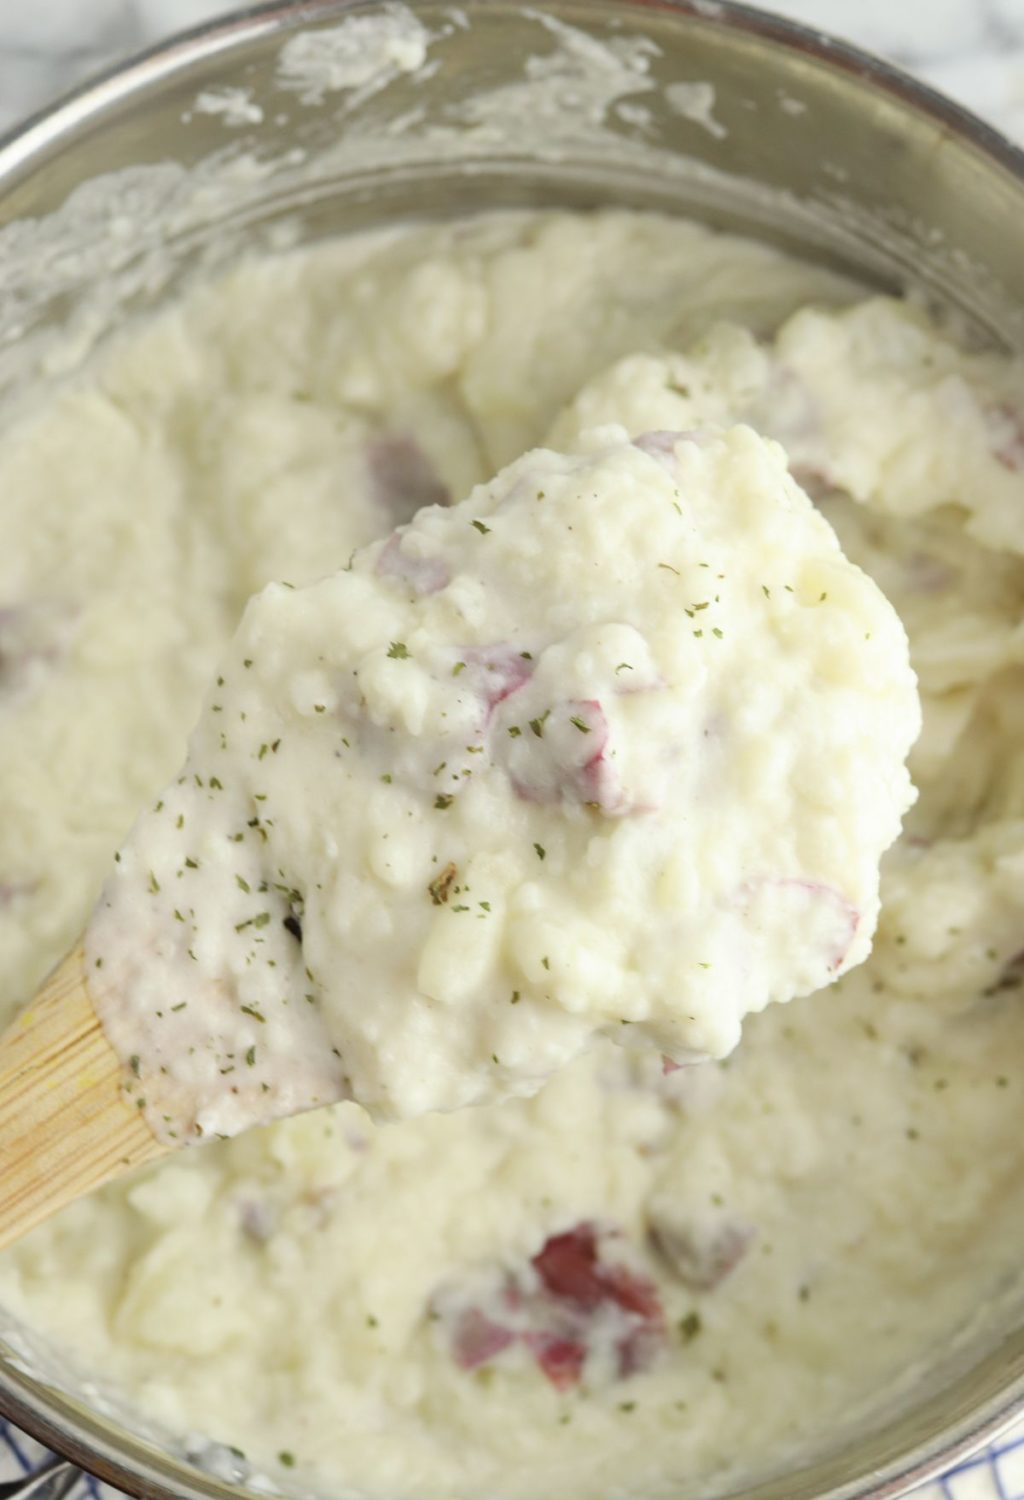 Mashed potatoes in a pan with a wooden spoon.